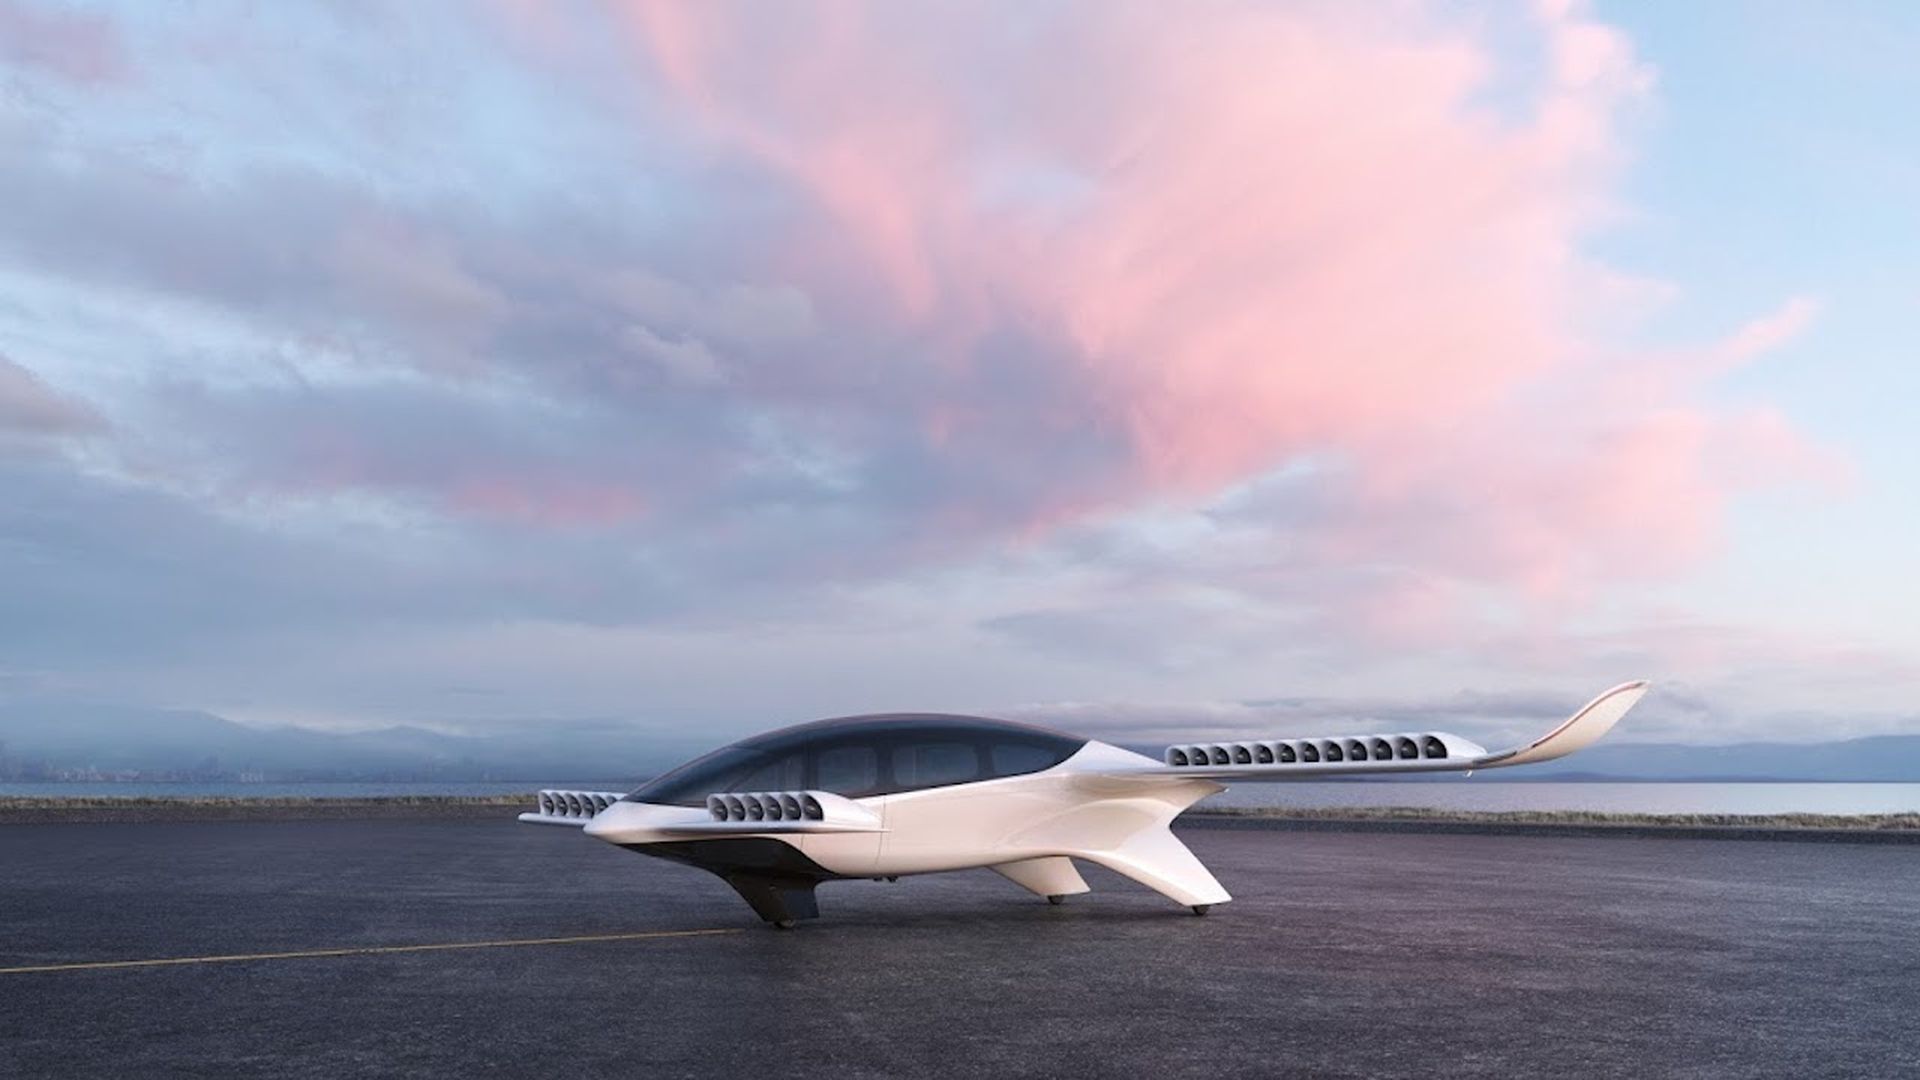 Image of the electric vertical take-off and landing jet from the company Lilium